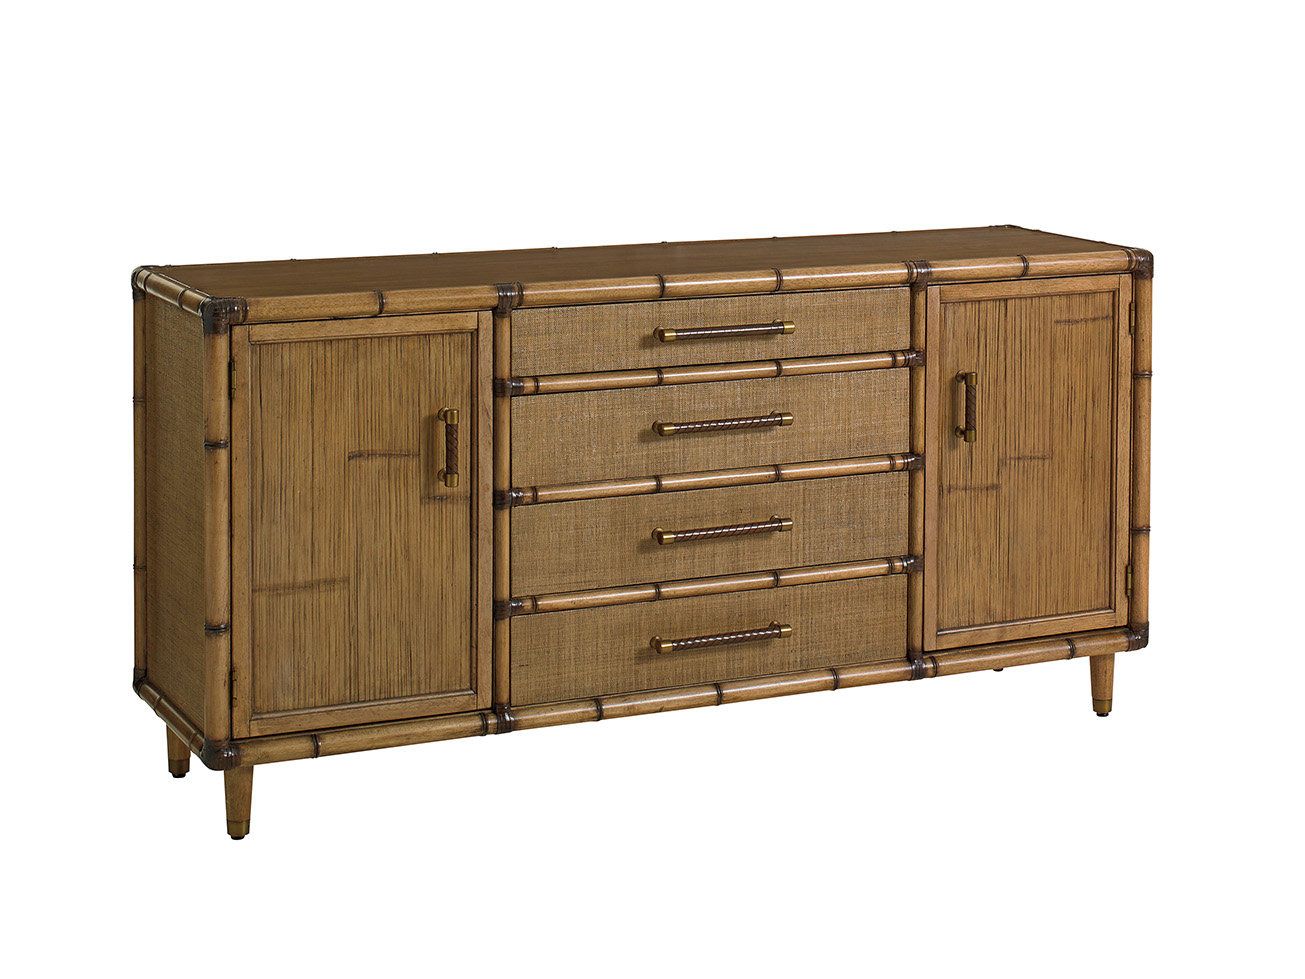 Twin Palms Sideboard With Regard To Latest Drummond 4 Drawer Sideboards (View 14 of 20)